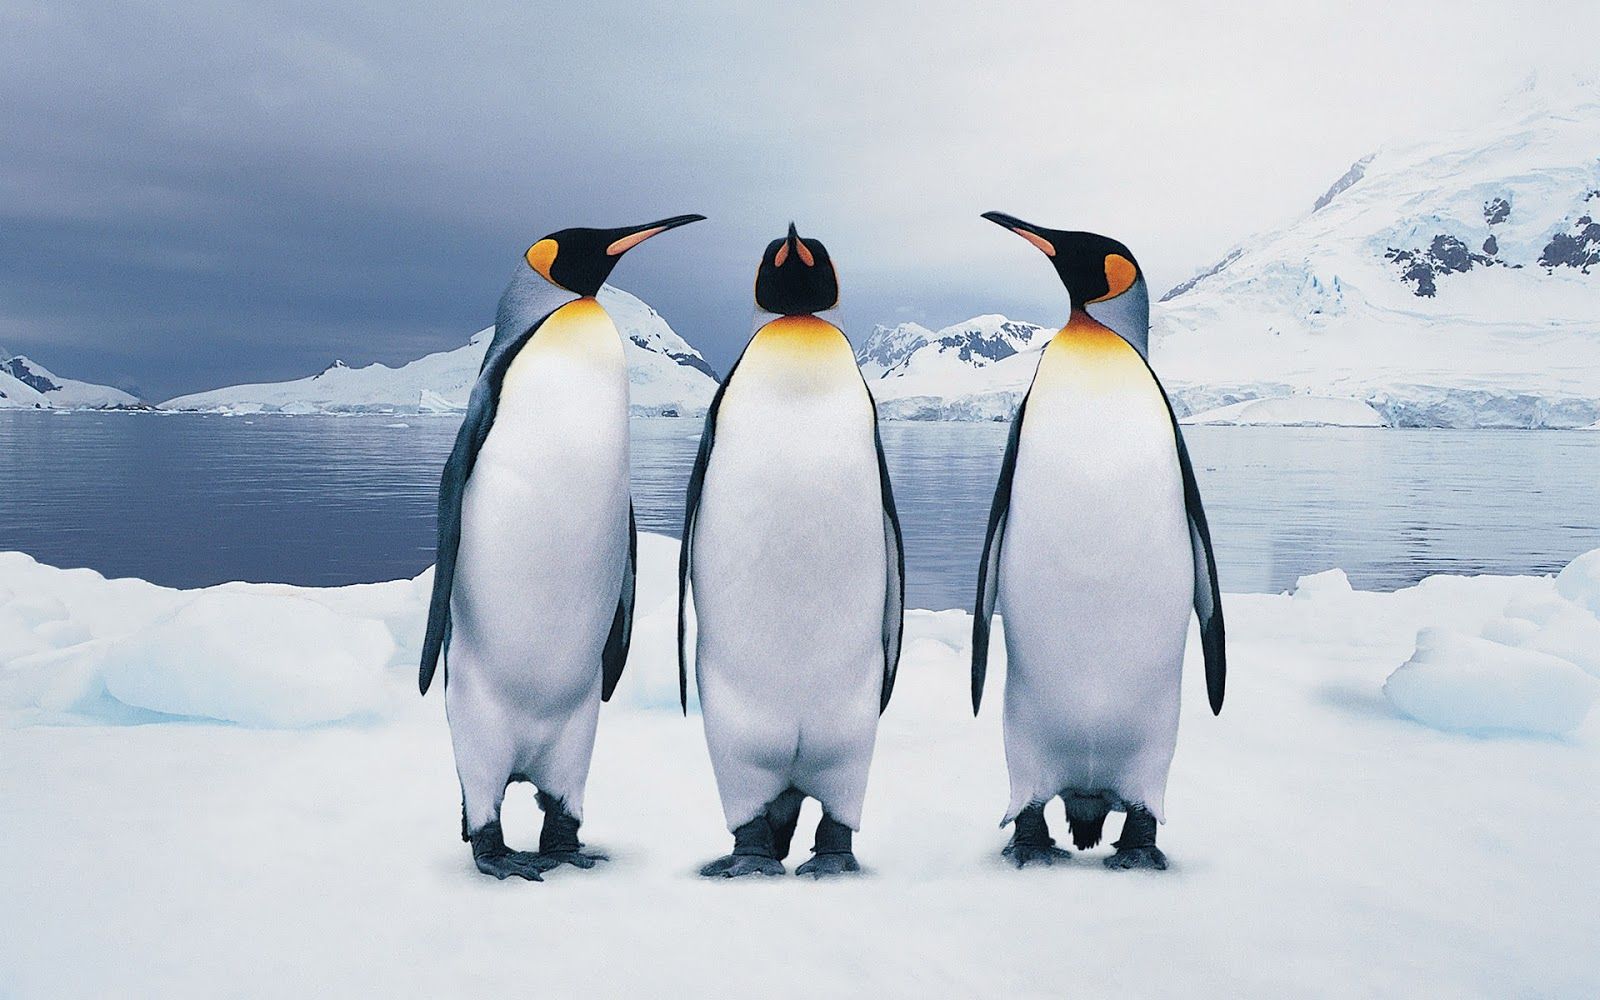 Collection Of Penguin Wallpaper On HDwallpaper Image